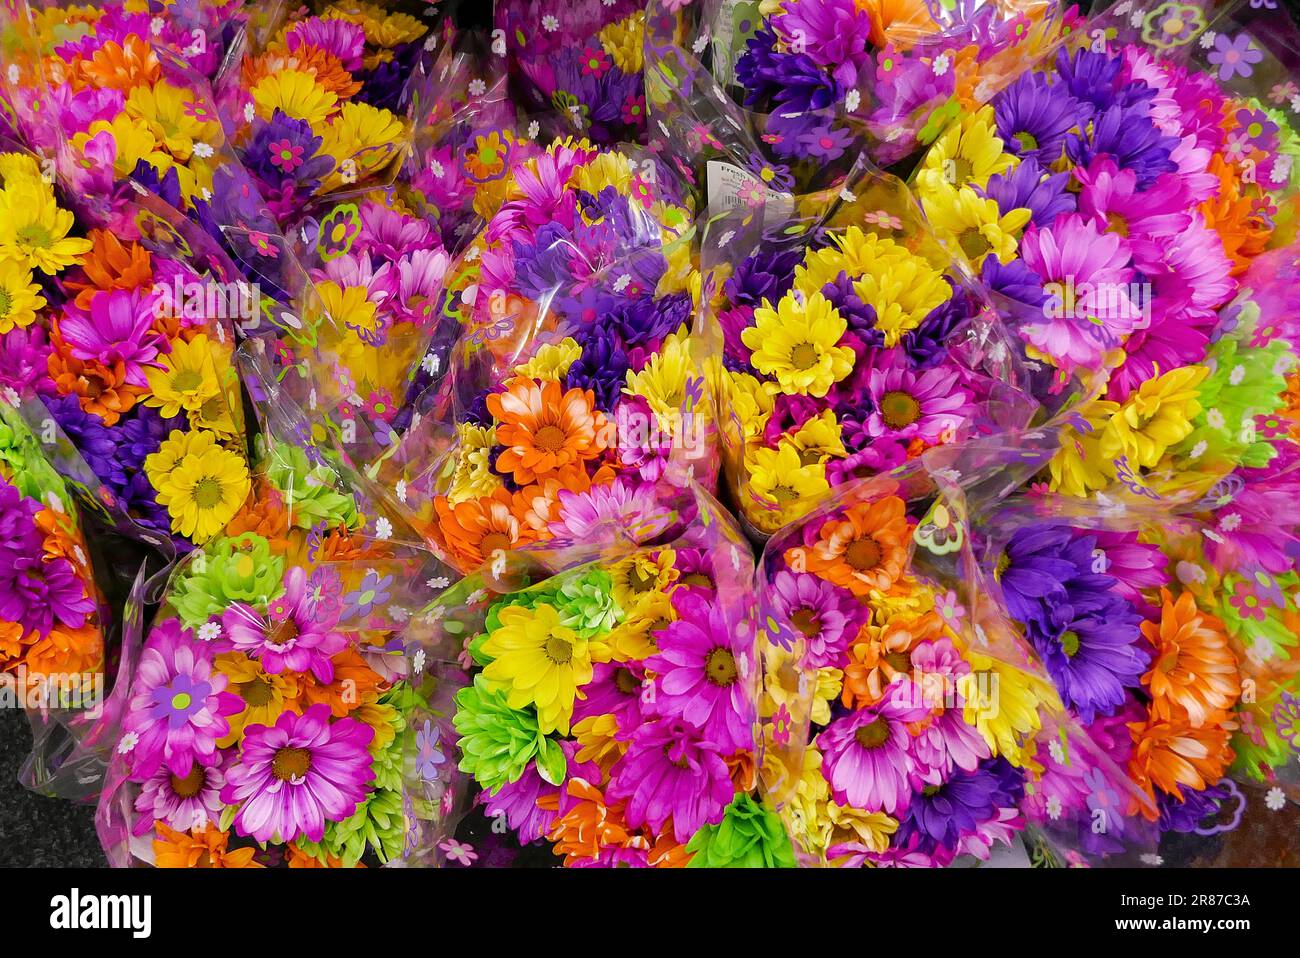 Bunches of colorful flowers for sale in a supermarket in Florida. Stock Photo